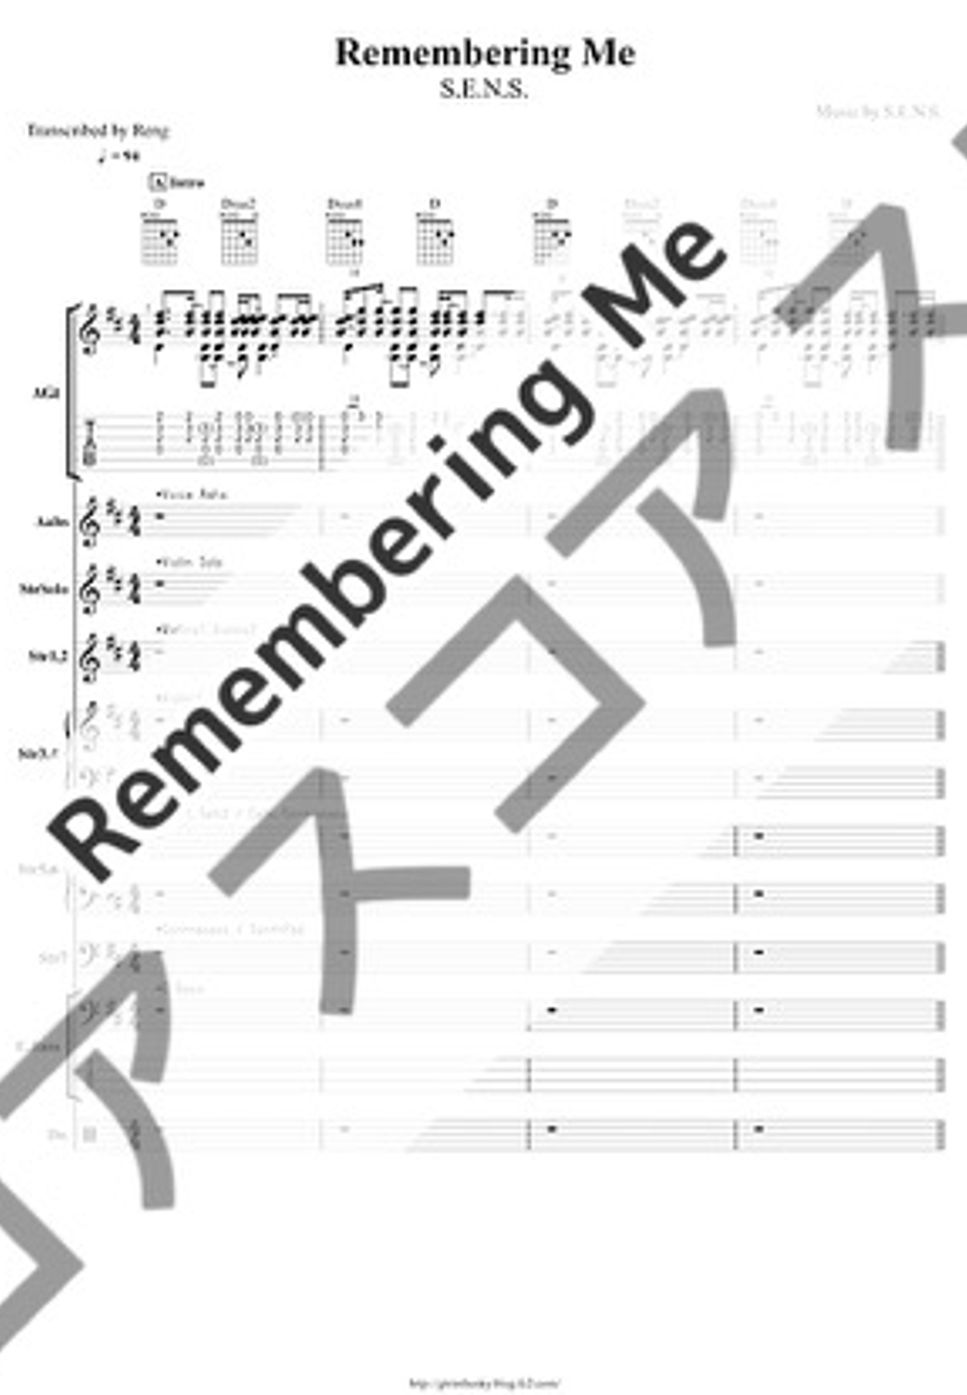 S.E.N.S. - Remembering Me (インスト曲/Inst./ドラマ『美しき日々より』) by Score by Reng